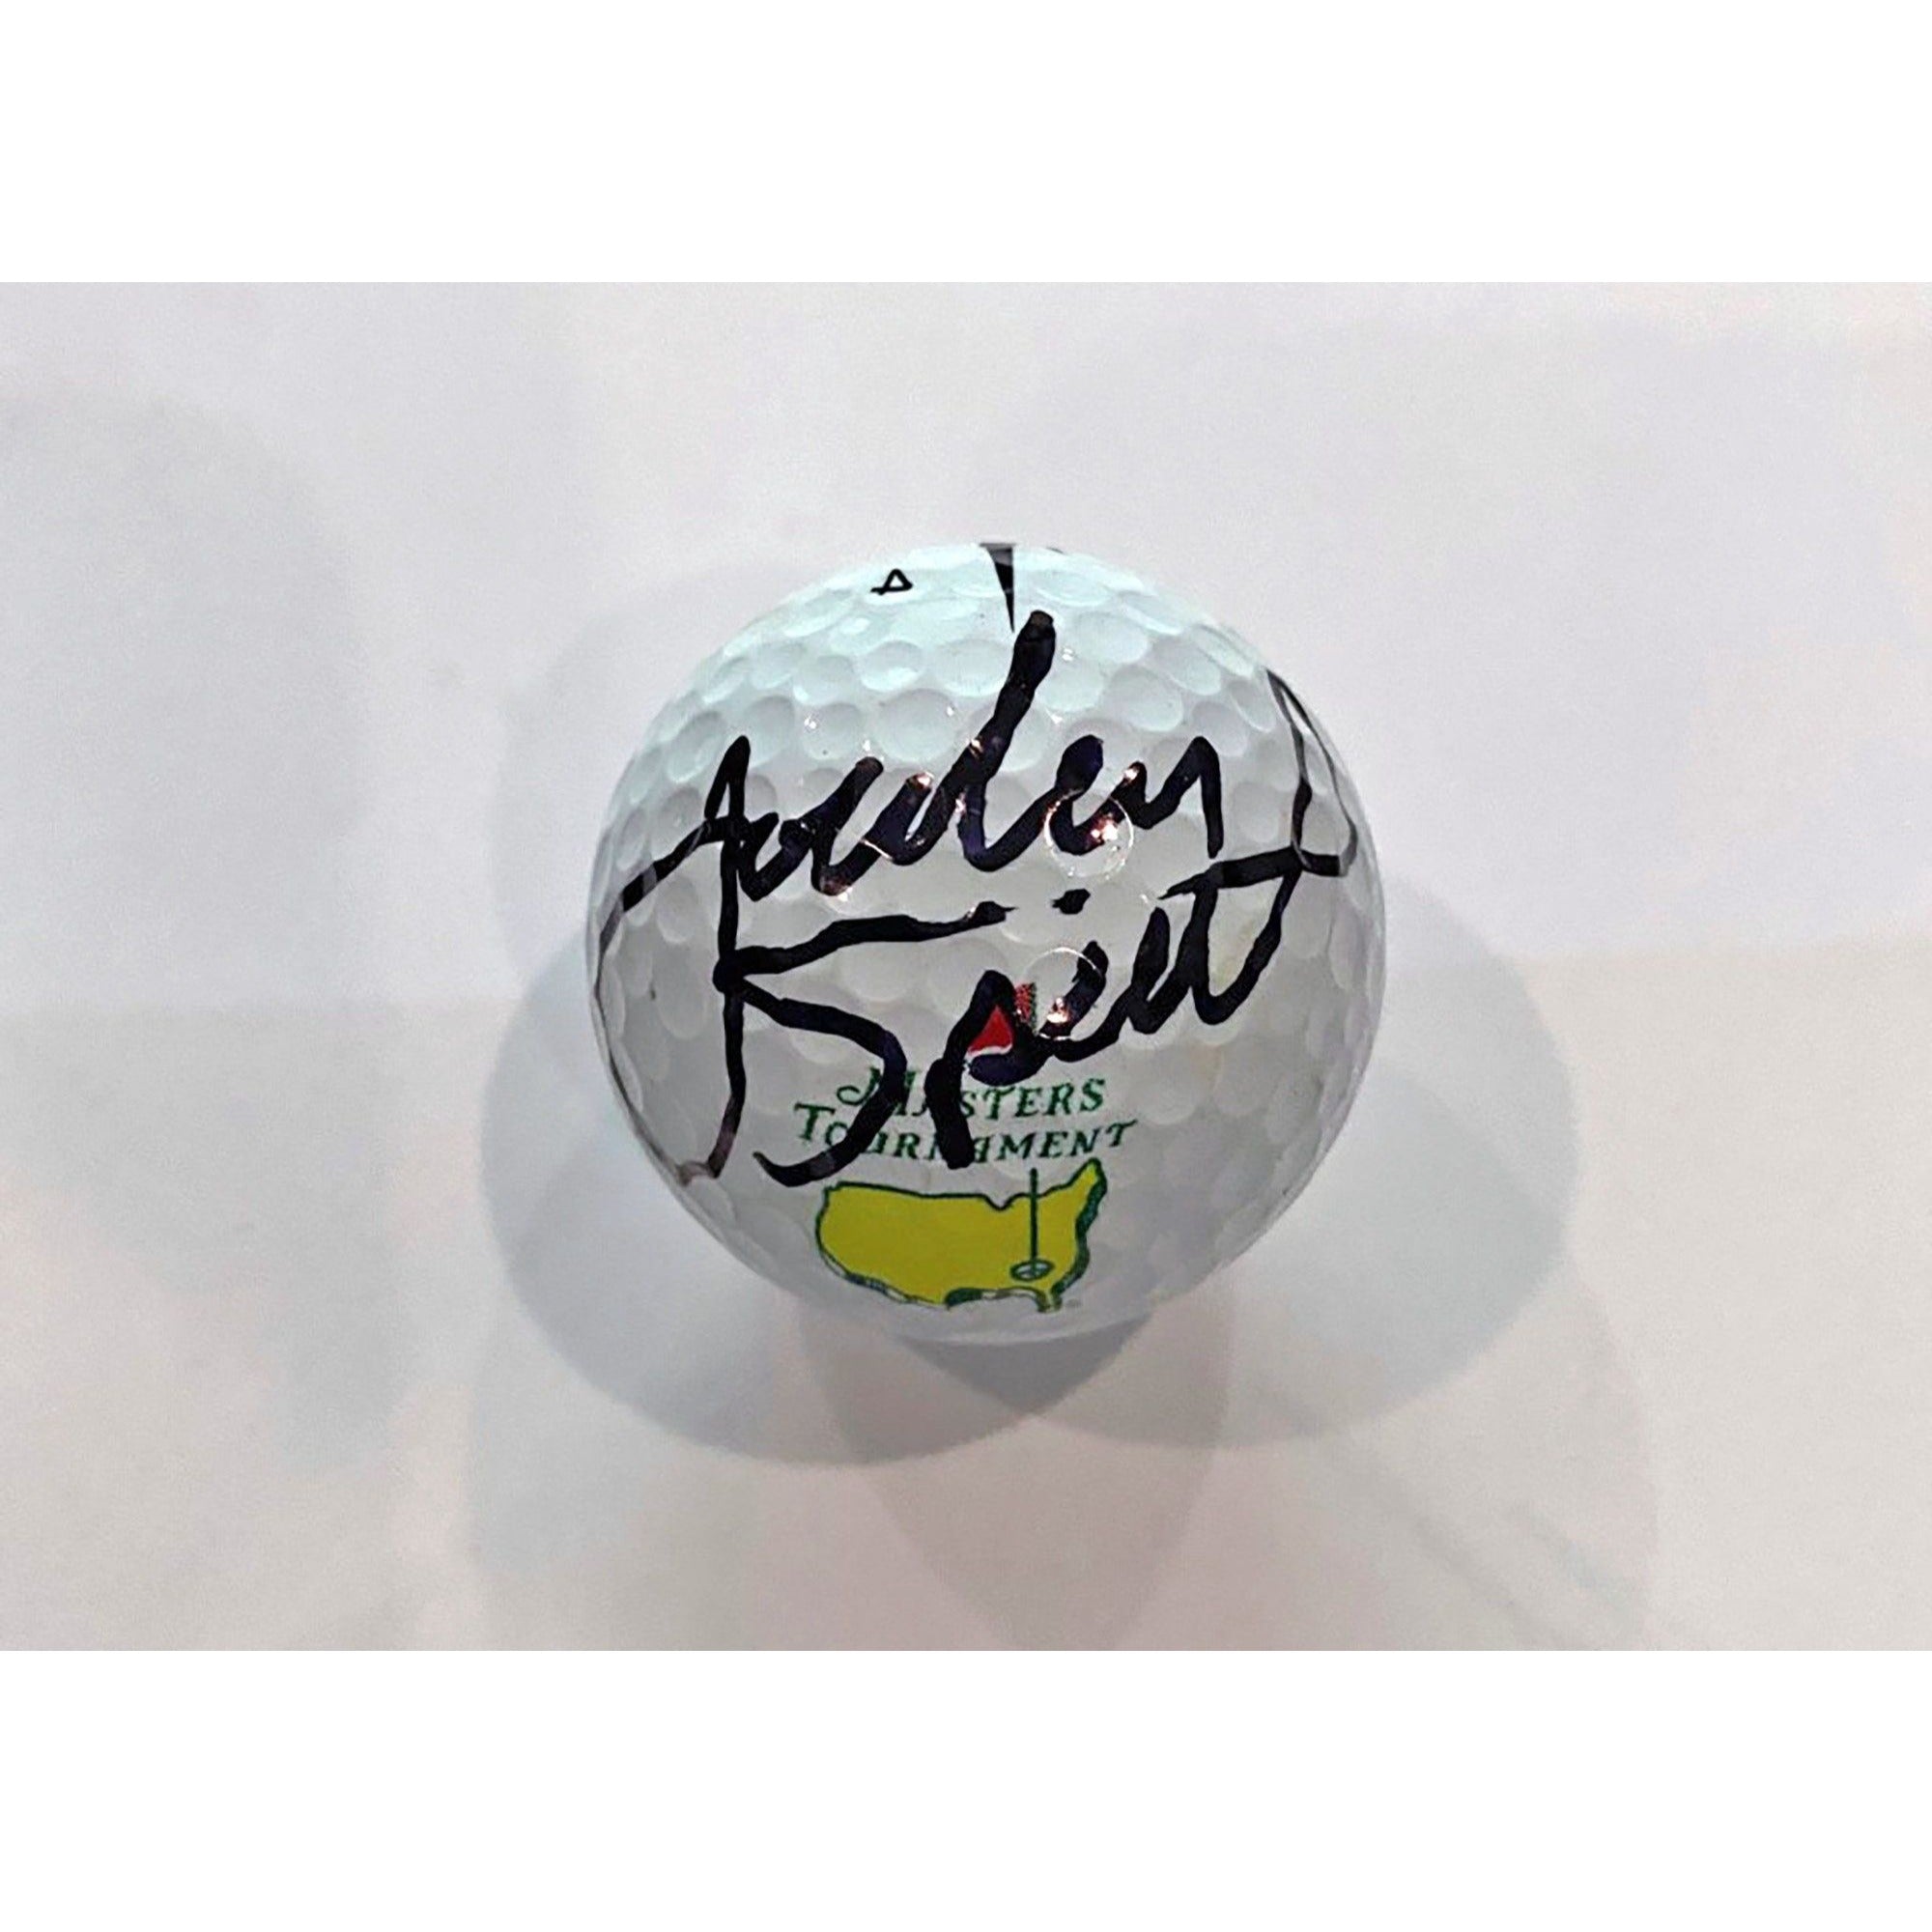 Jordan Spieth Masters champion signed golf ball with proof